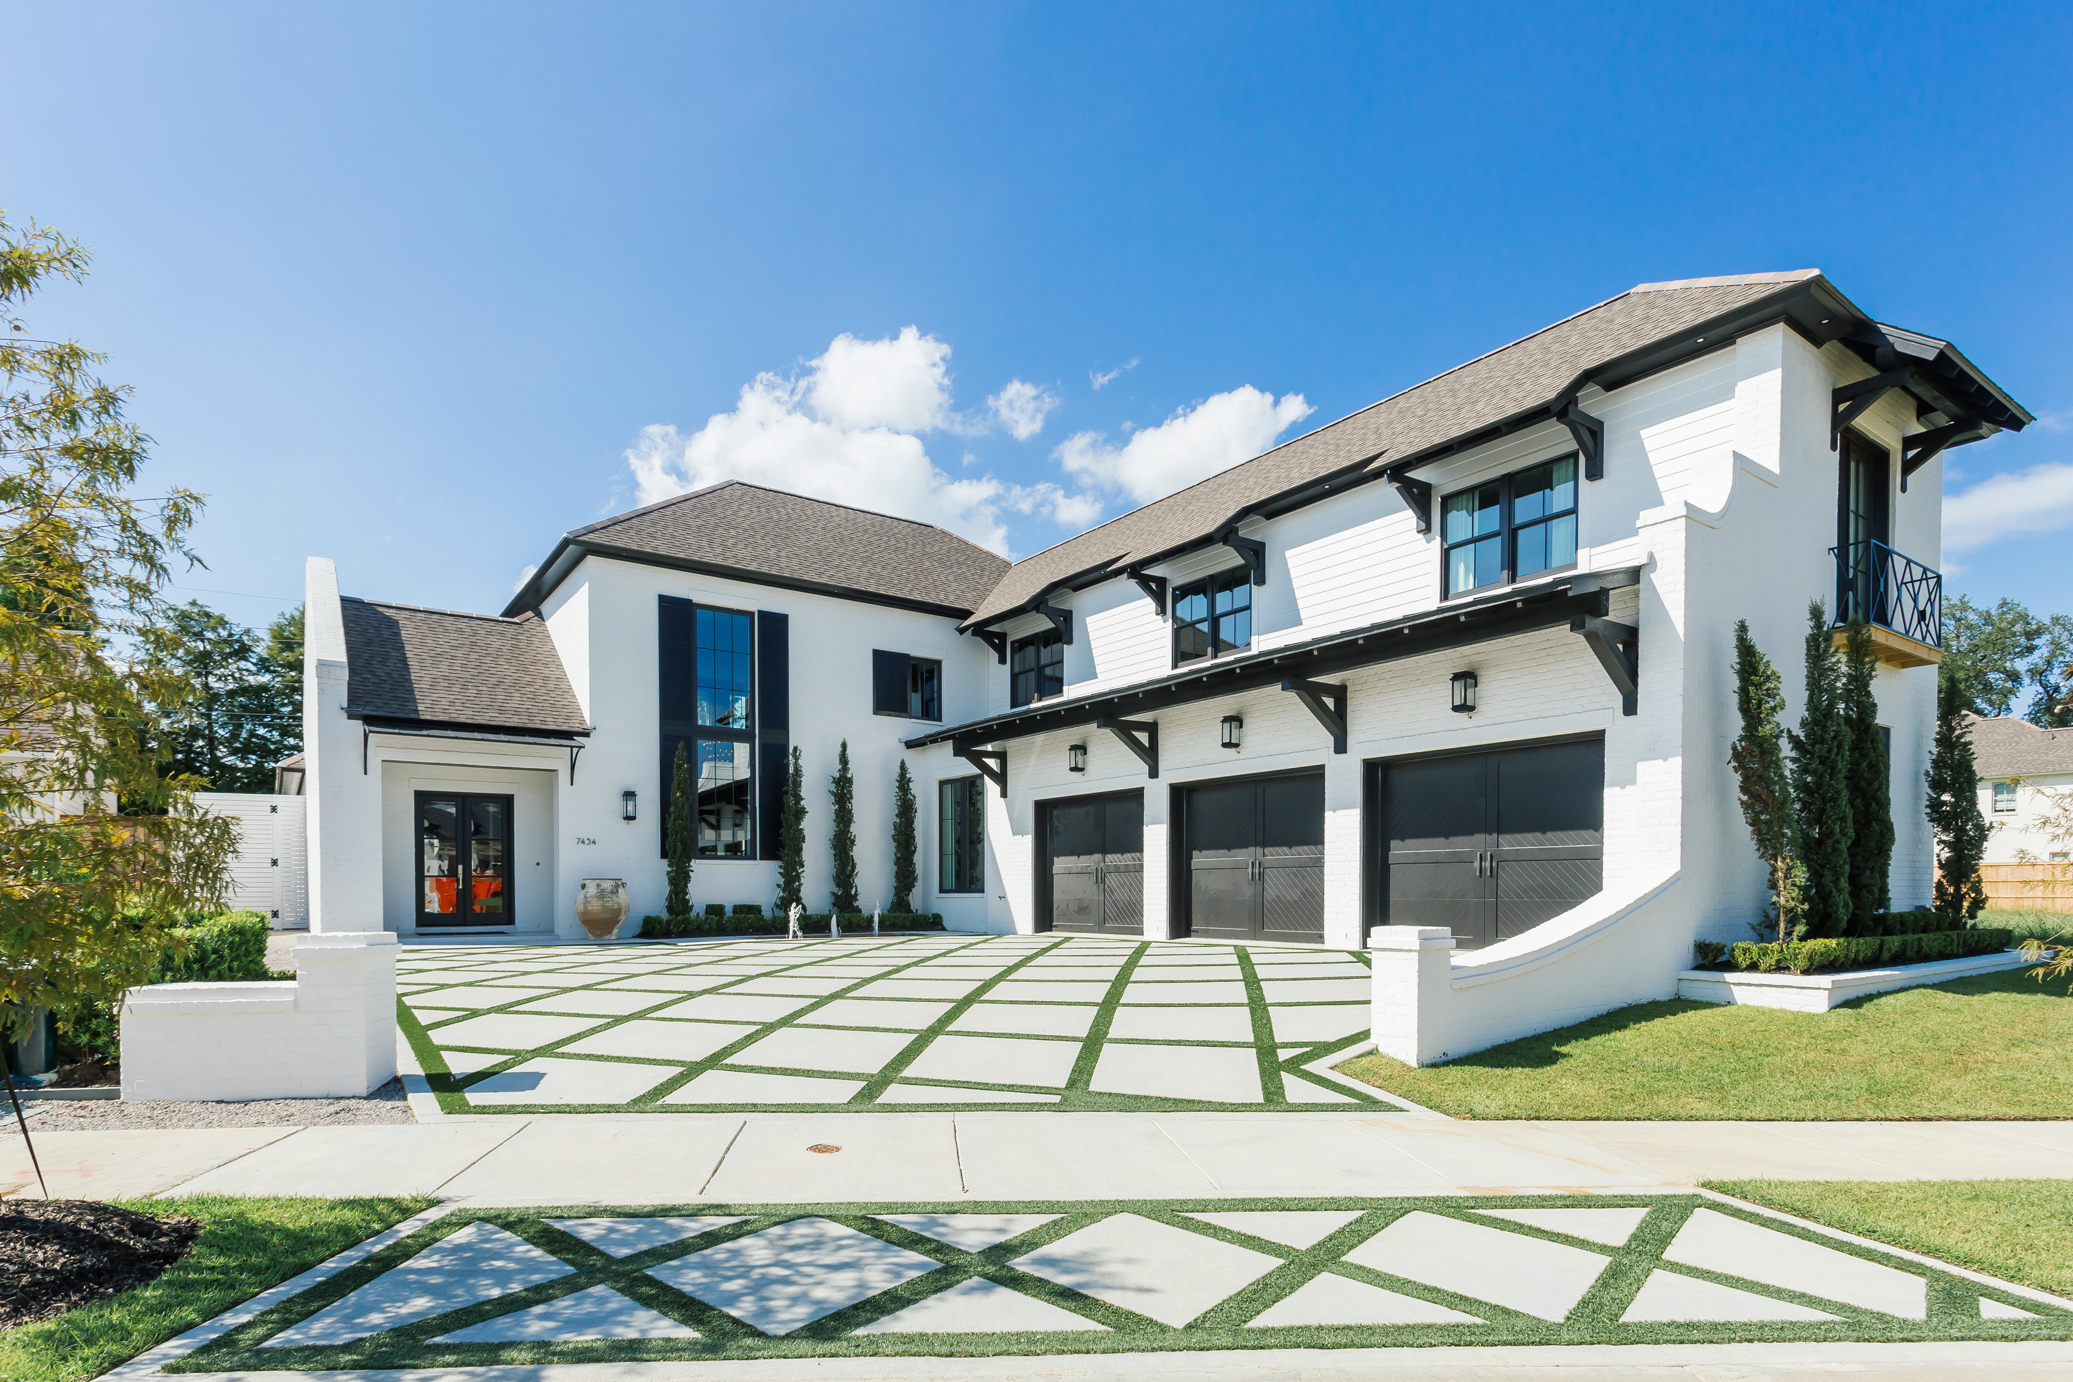 Bright white exterior paint contrasts with black trim for a bold modern statement that makes Jason’s home stand out in its location in the Settlement at Willow Grove. The driveway design was created by Turf-Logic using integrated artificial grass. 